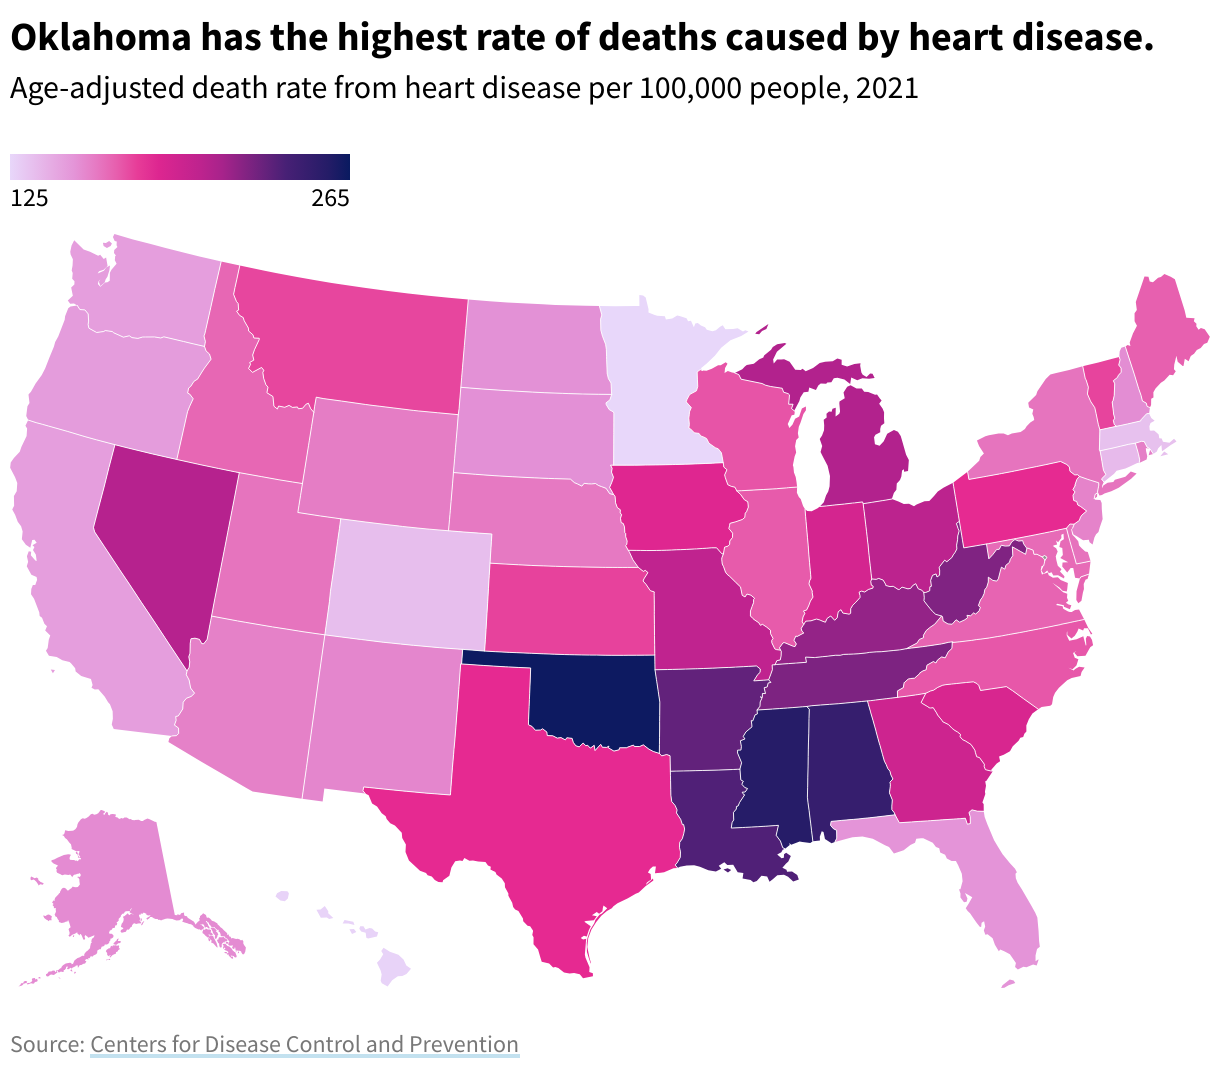 Map of the US by state, showing the rate of heart disease deaths in 2019 per 100,000 people. Oklahoma has the highest rate of deaths caused by heart disease.